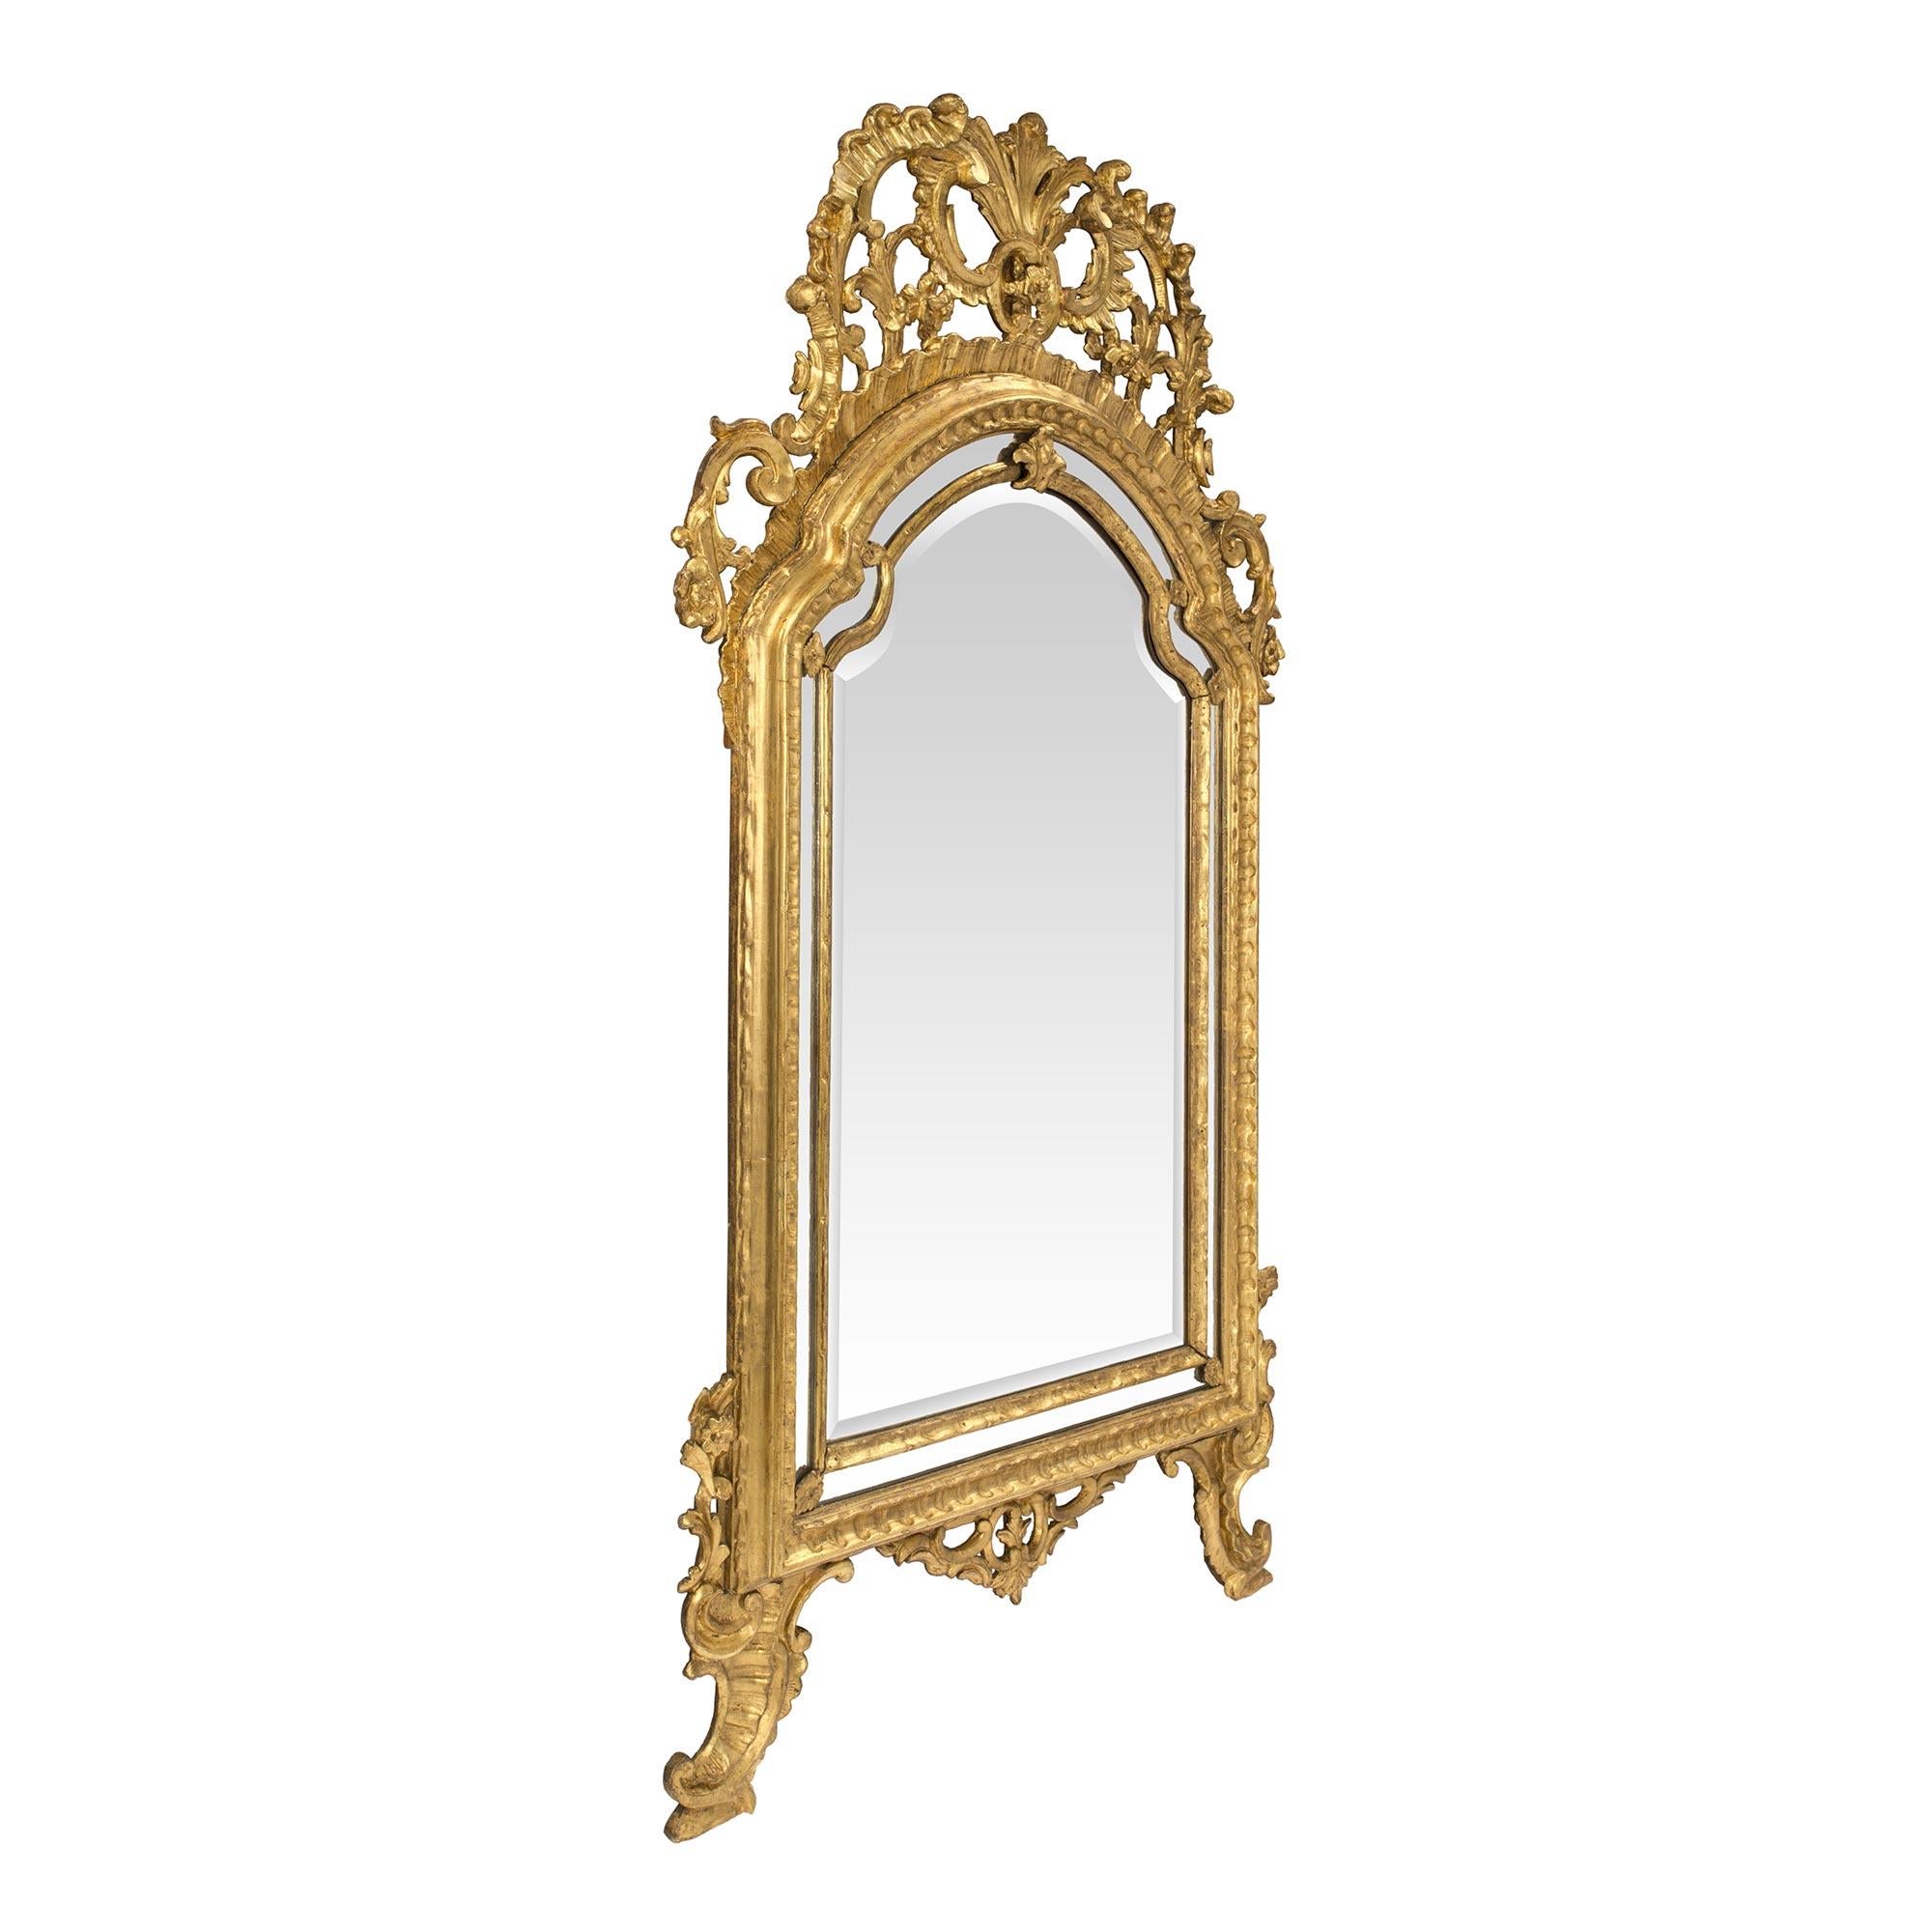 A stunning and high quality Italian 18th century Louis XIV period giltwood double framed mirror from the region of Piedmont, Turino. The elegant mirror is raised by ‘S’ scrolled legs with gilt acanthus leaves and a pierced central reserve. The two